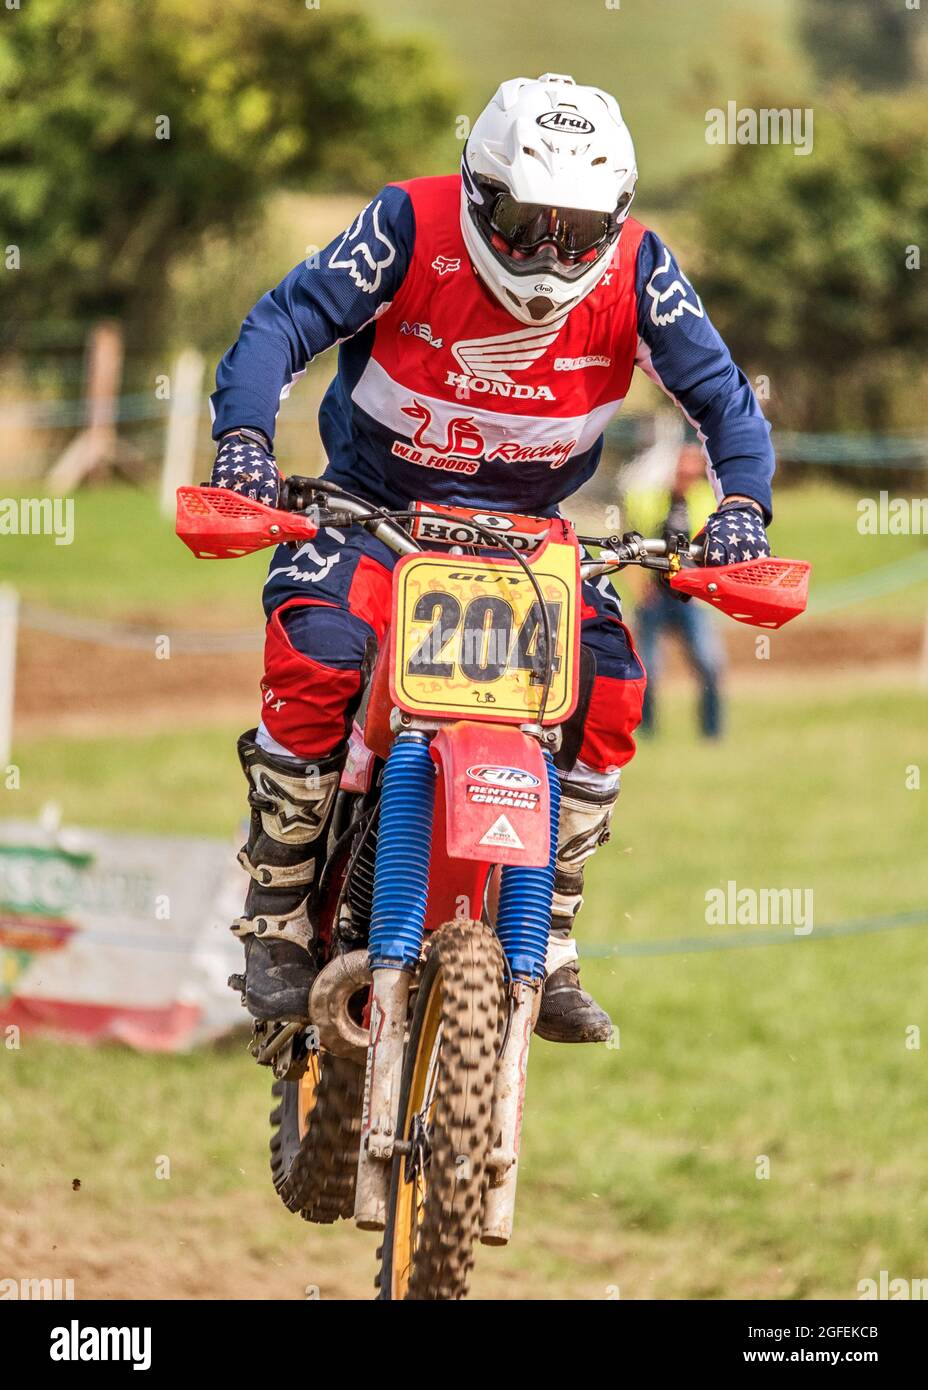 Motorcycle Racing Association Ireland Charity Classic moto-X, Ballyslagh, County Down, Irlande du Nord, 13/14 août 2021 Banque D'Images